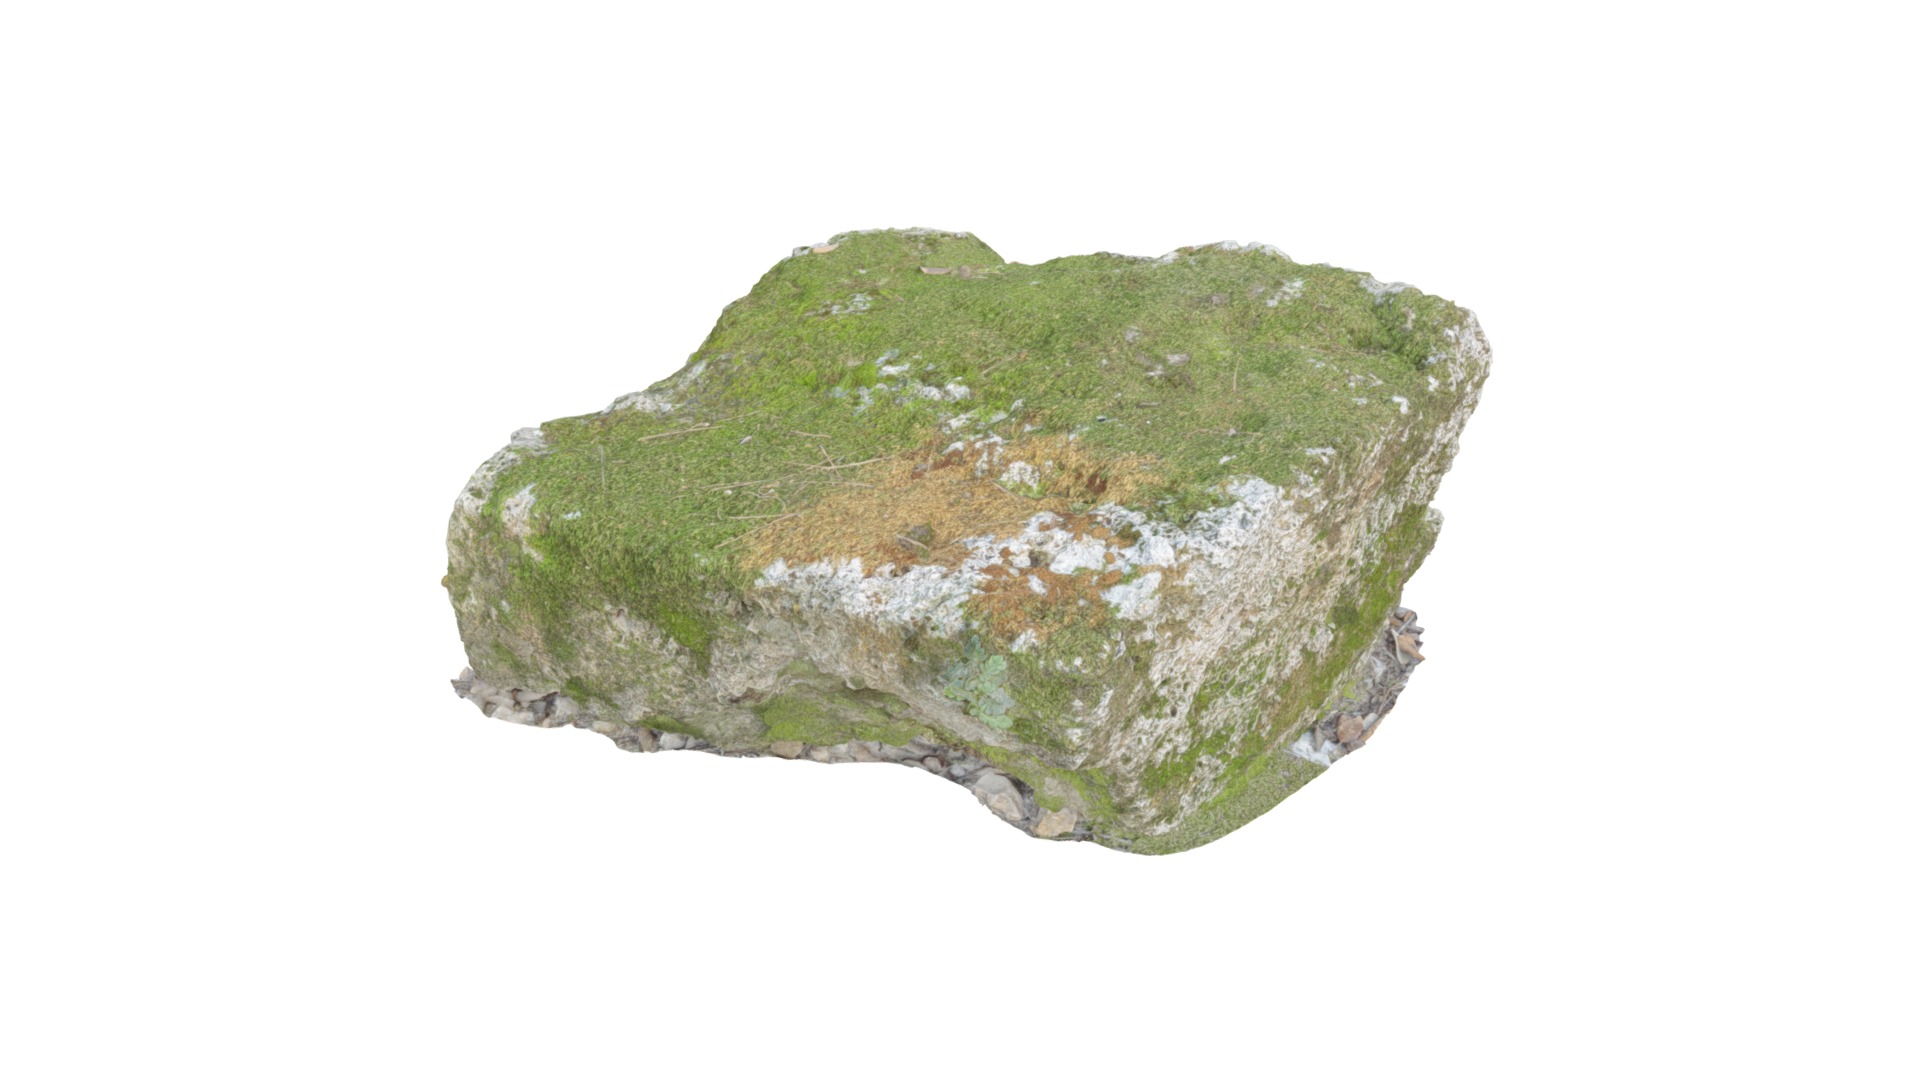 3D model Progressive Rock - This is a 3D model of the Progressive Rock. The 3D model is about a green rock with white crystals.